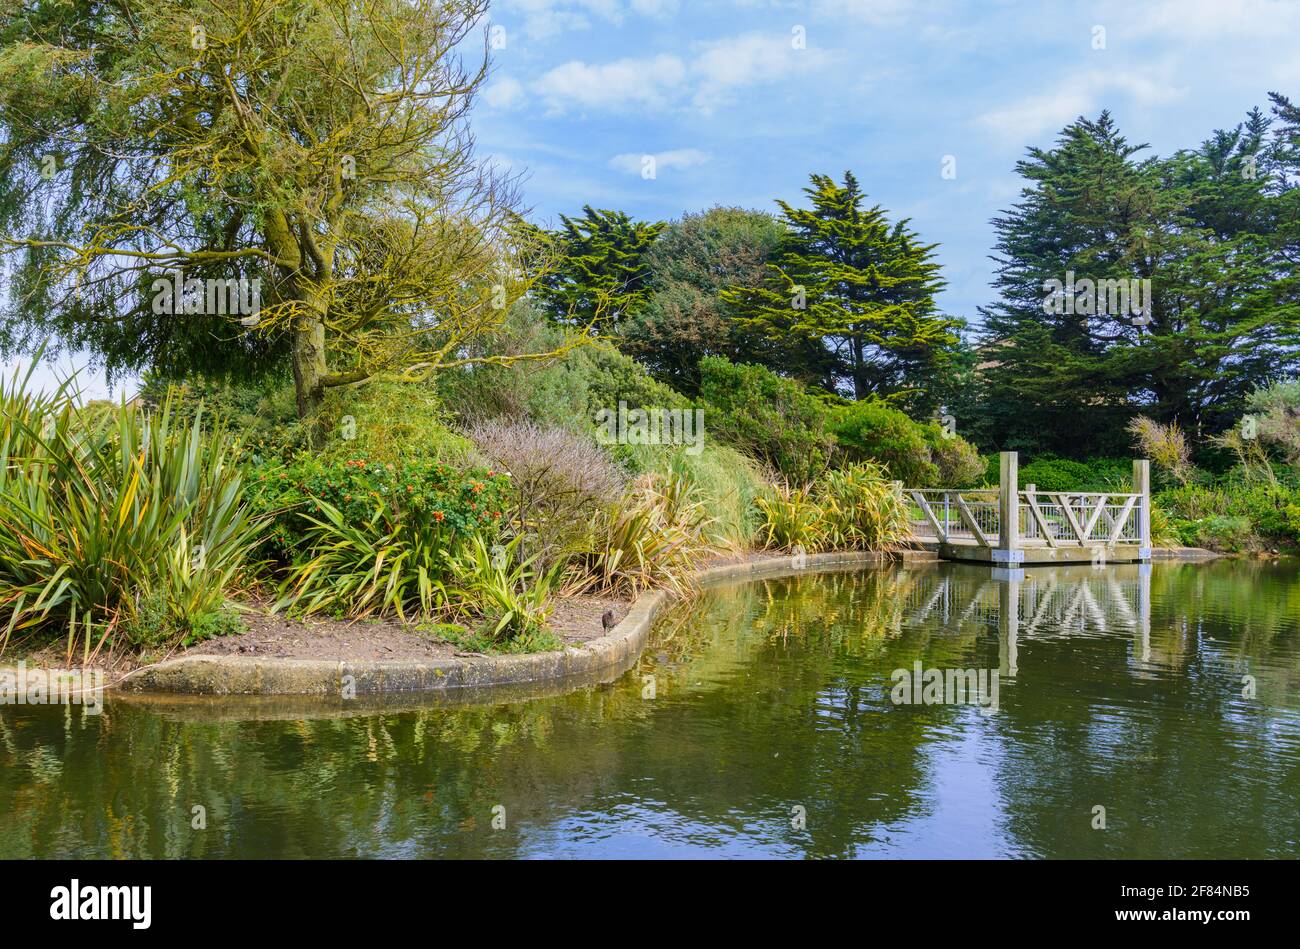 Landscape scene of greenery and a wooden viewing platform by a small lake in Summer in Mewsbrook Park, Littlehampton, West Sussex, England, UK. Stock Photo